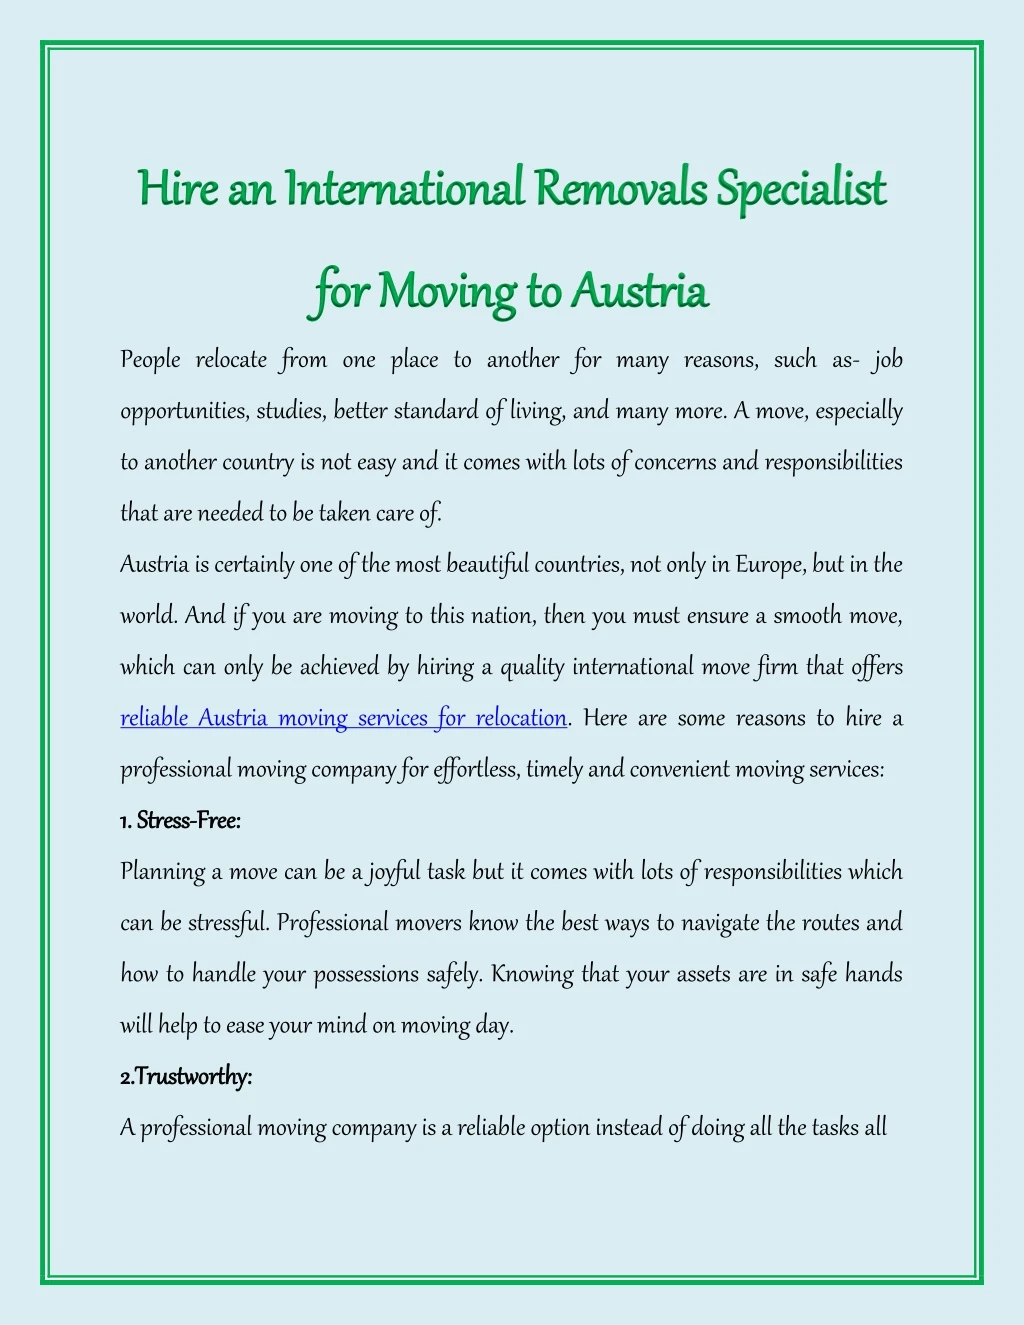 hire an international removals specialist hire